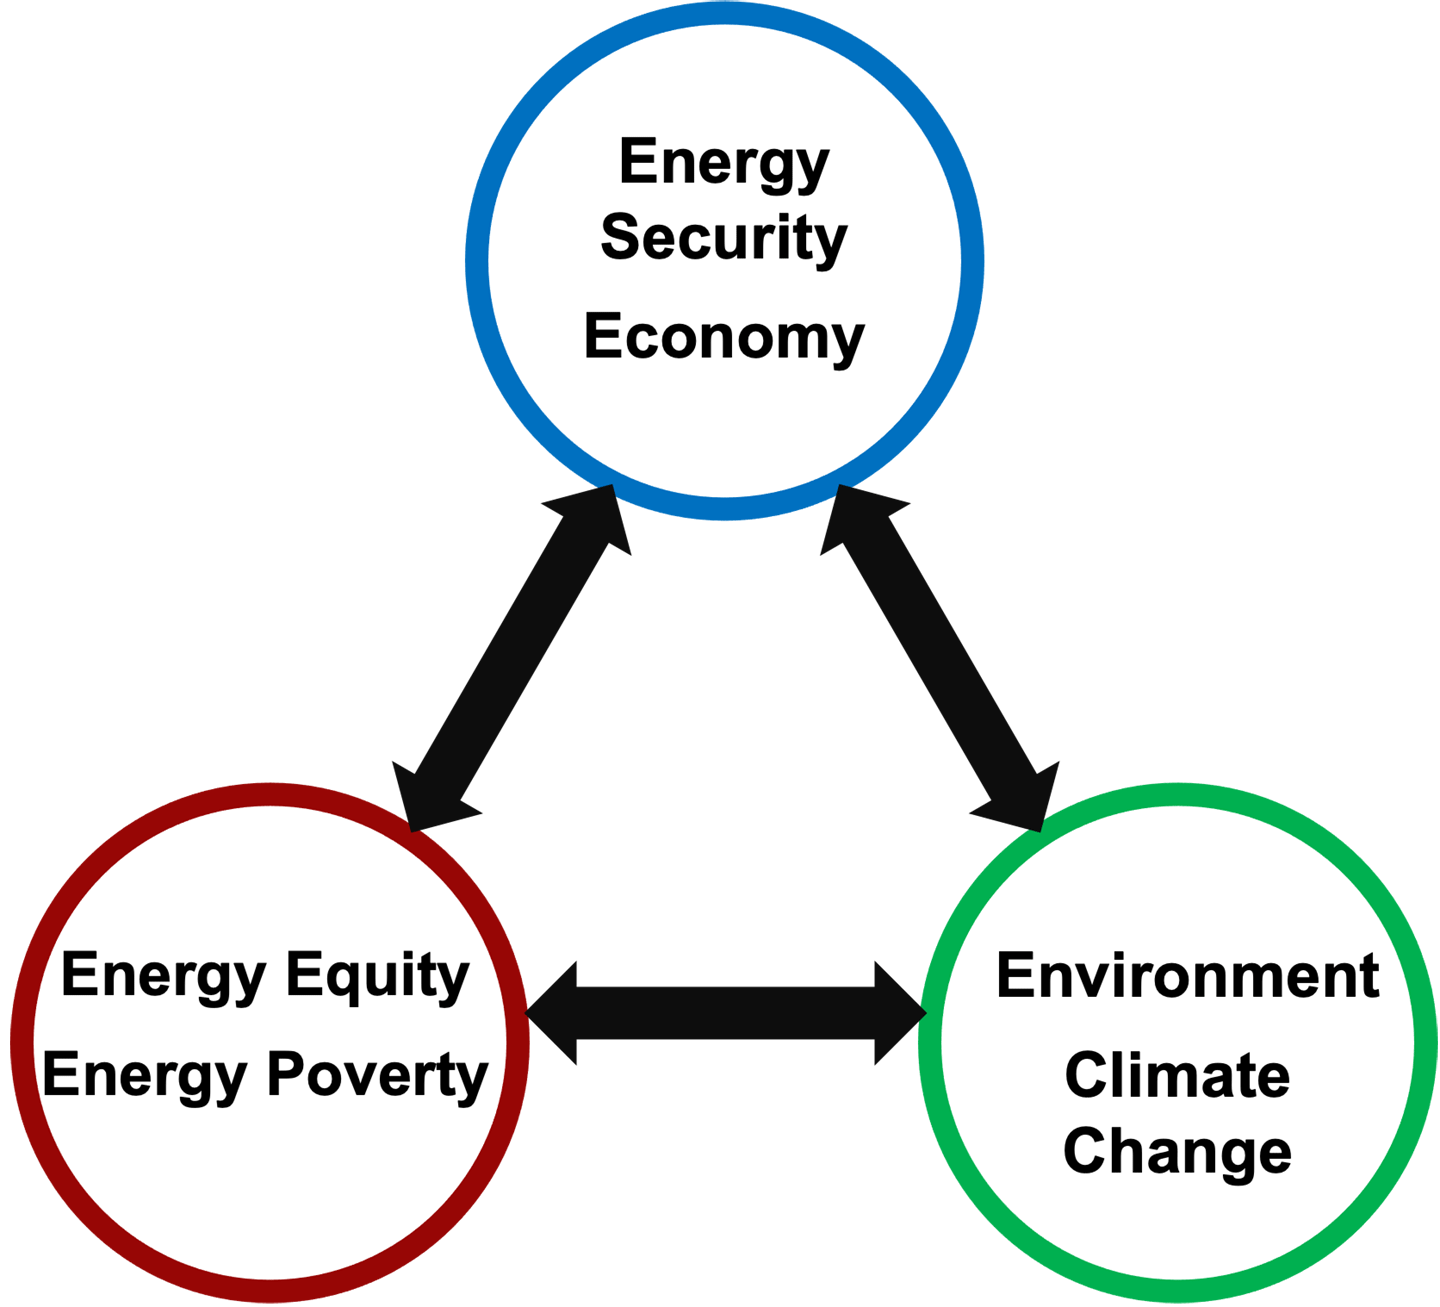 (b) Energy Trilemma: Competing Policy Areas